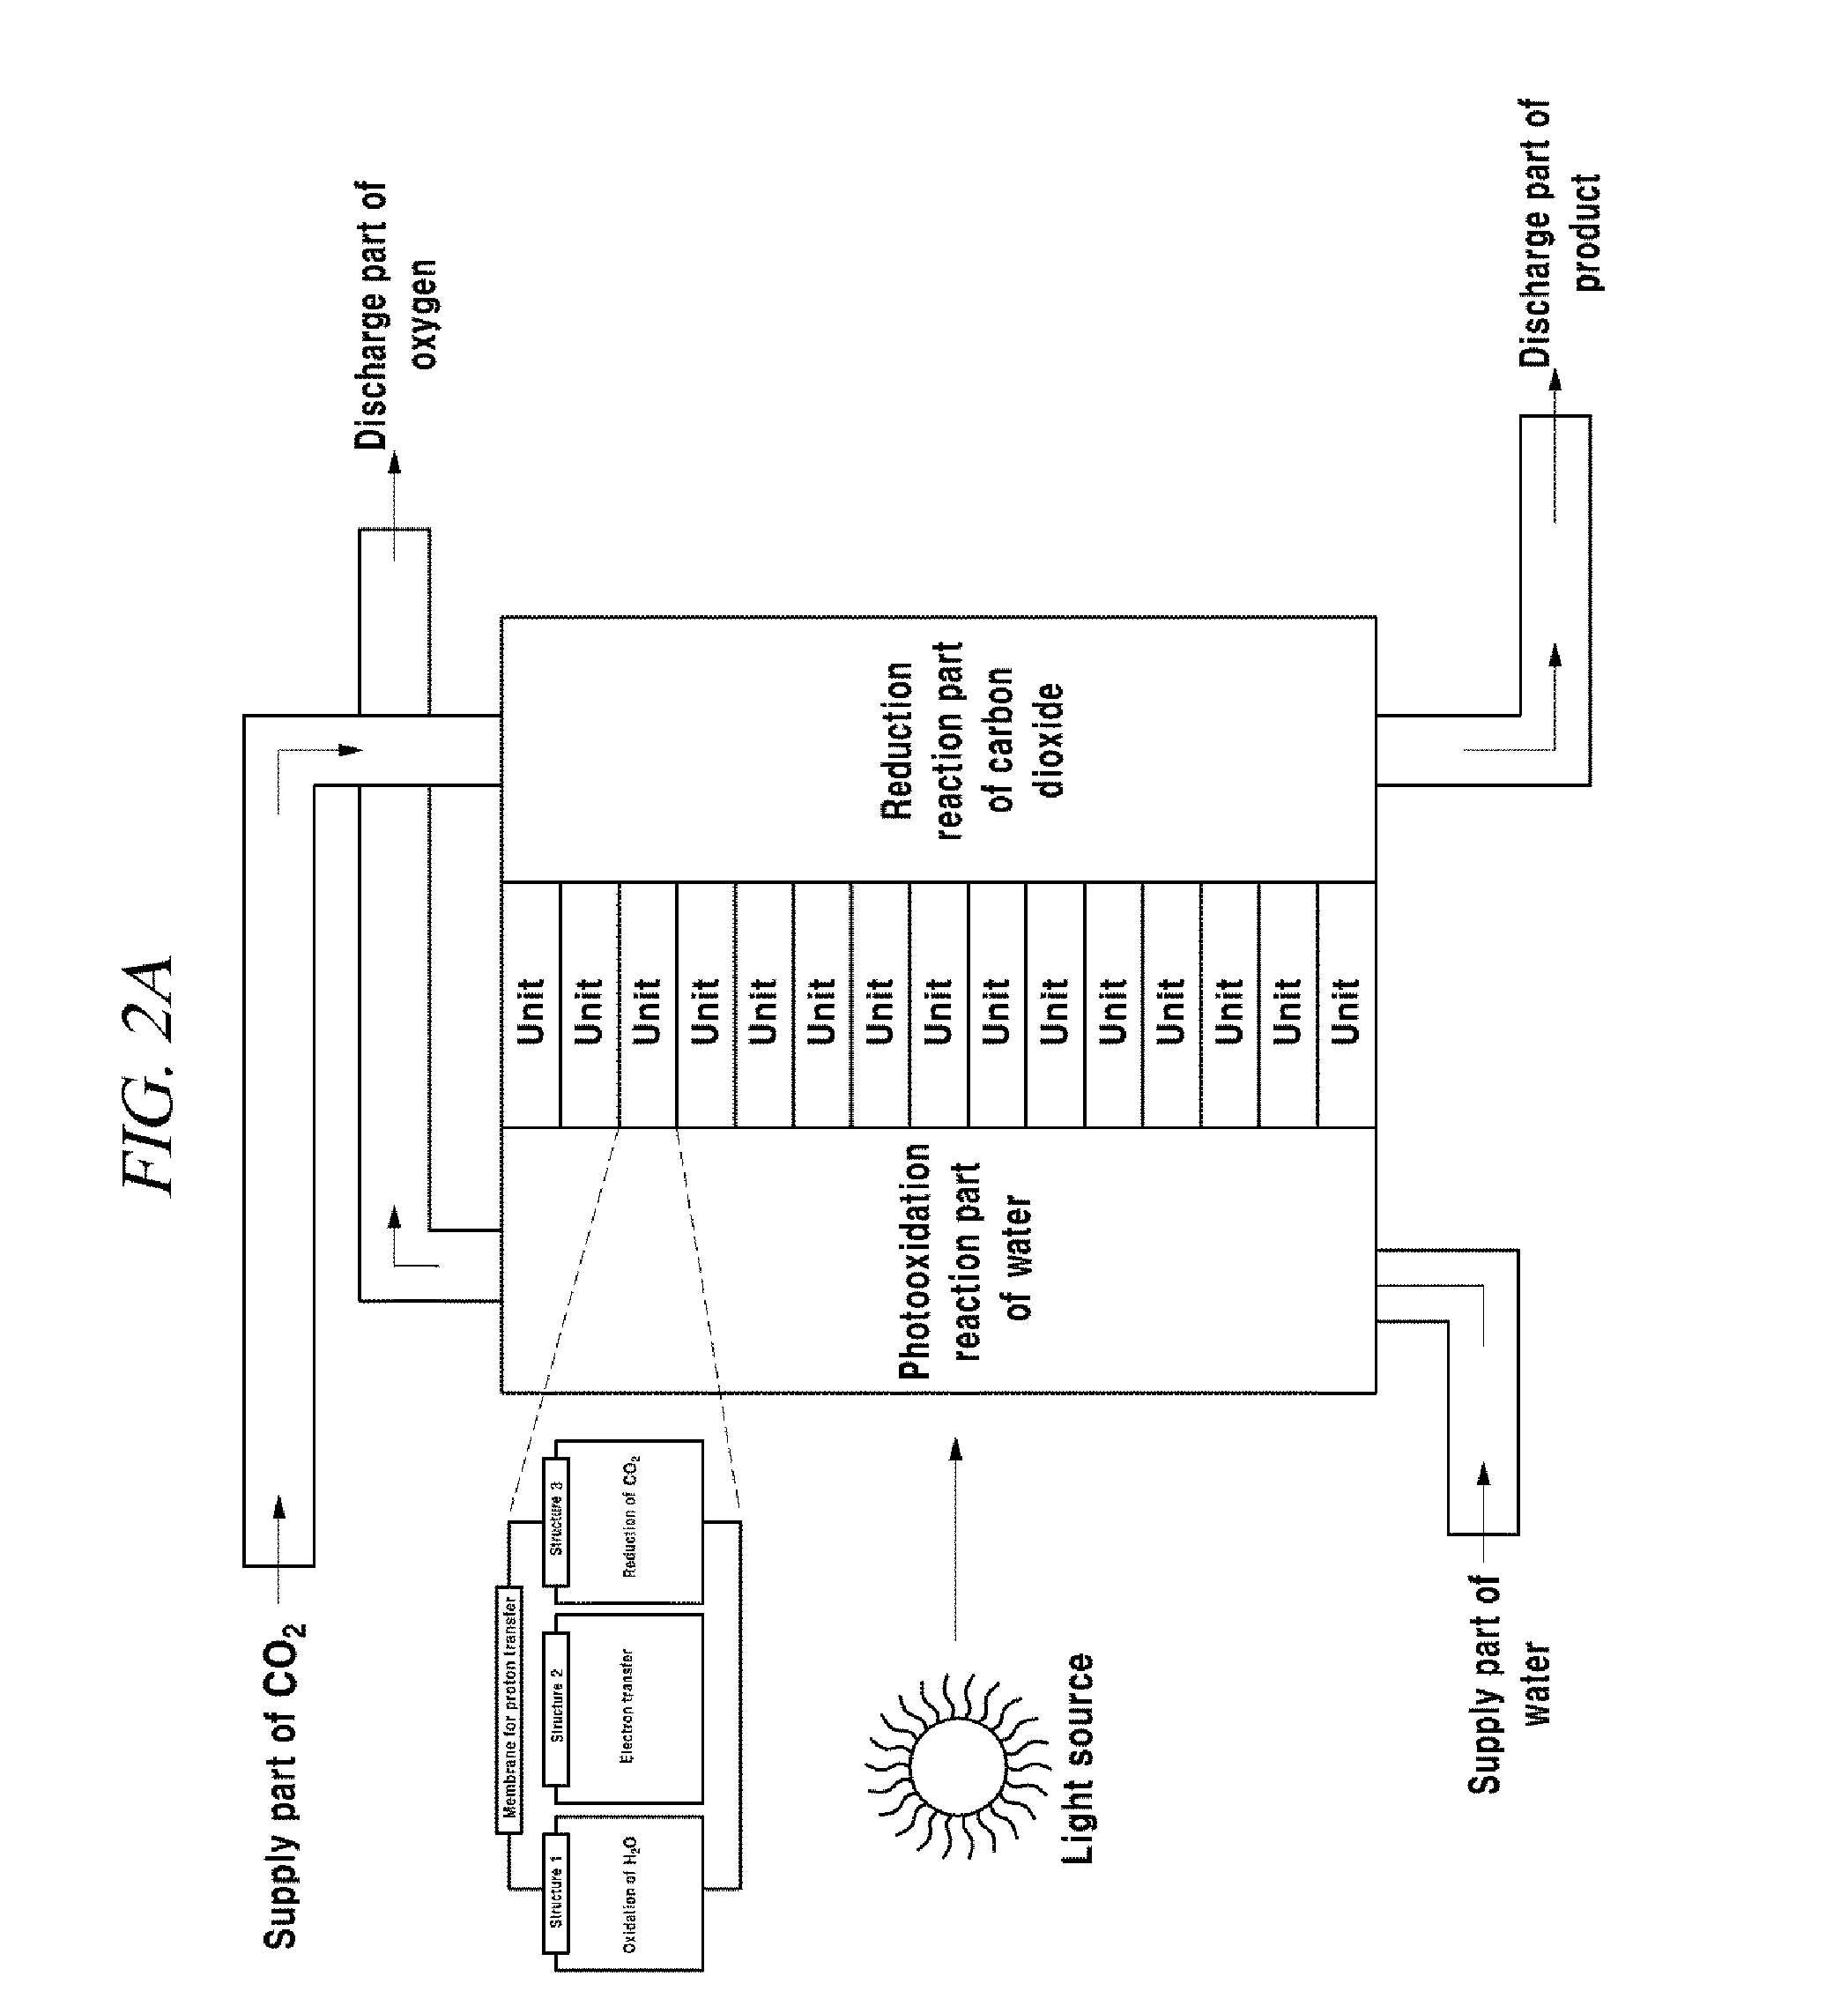 Composite structure for an artificial photosynthesis reaction and integrated reaction device for artificial photosynthesis including same, and composite structure for a water splitting reaction and integrated reaction device for water splitting including same